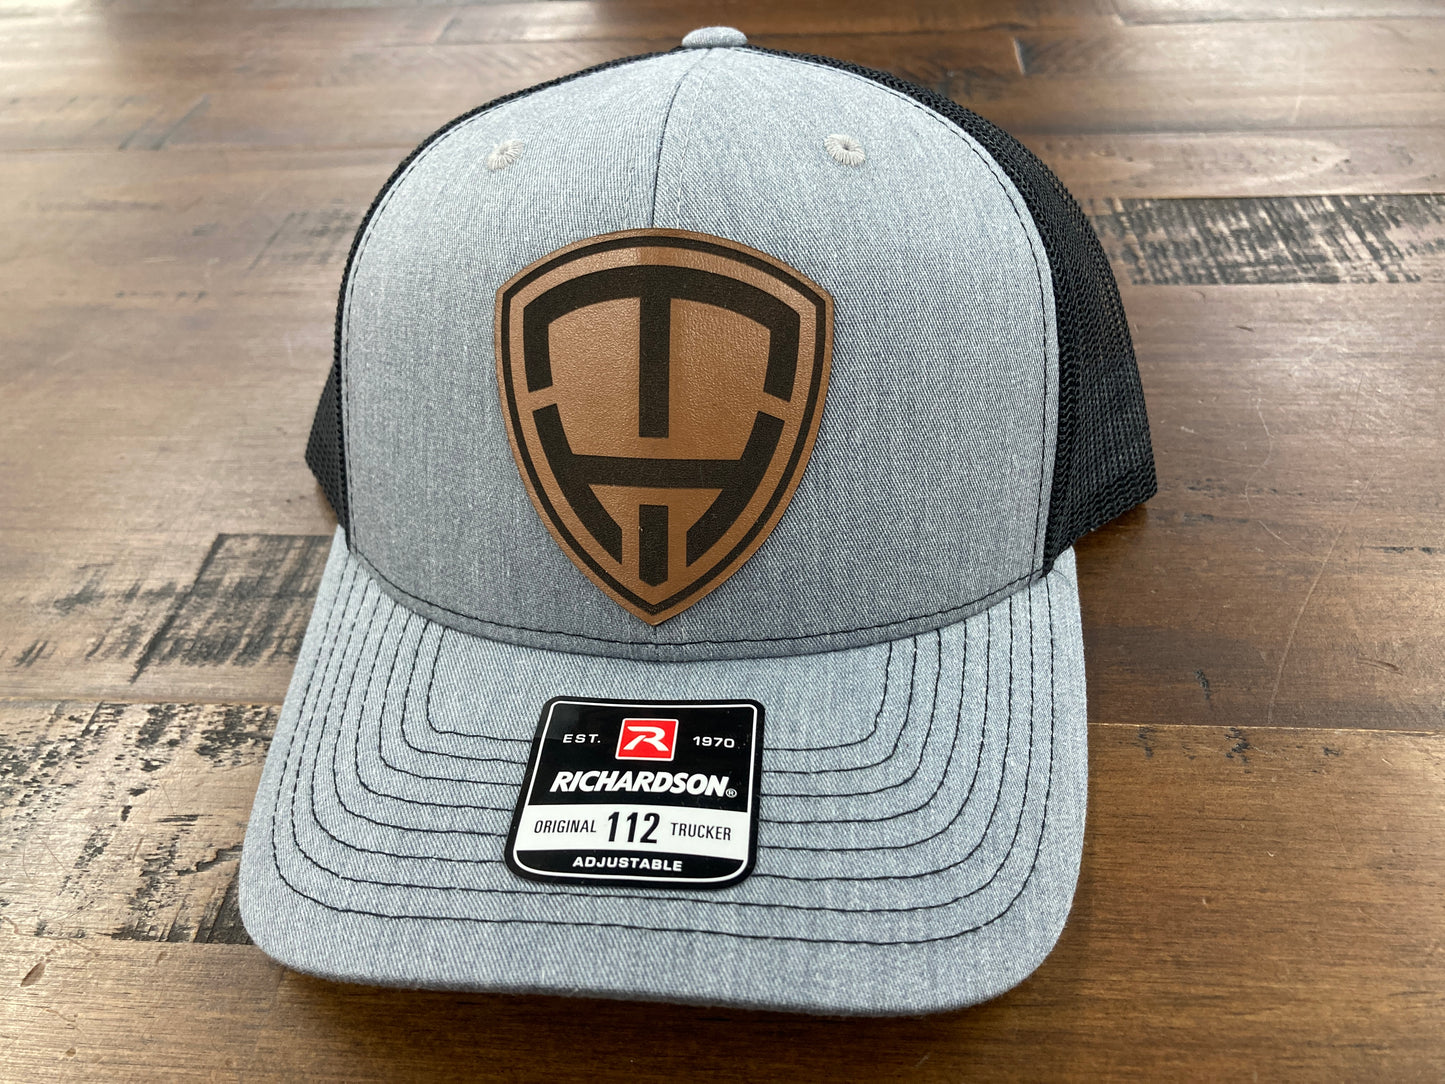 Thermal Hunting Patch Hats